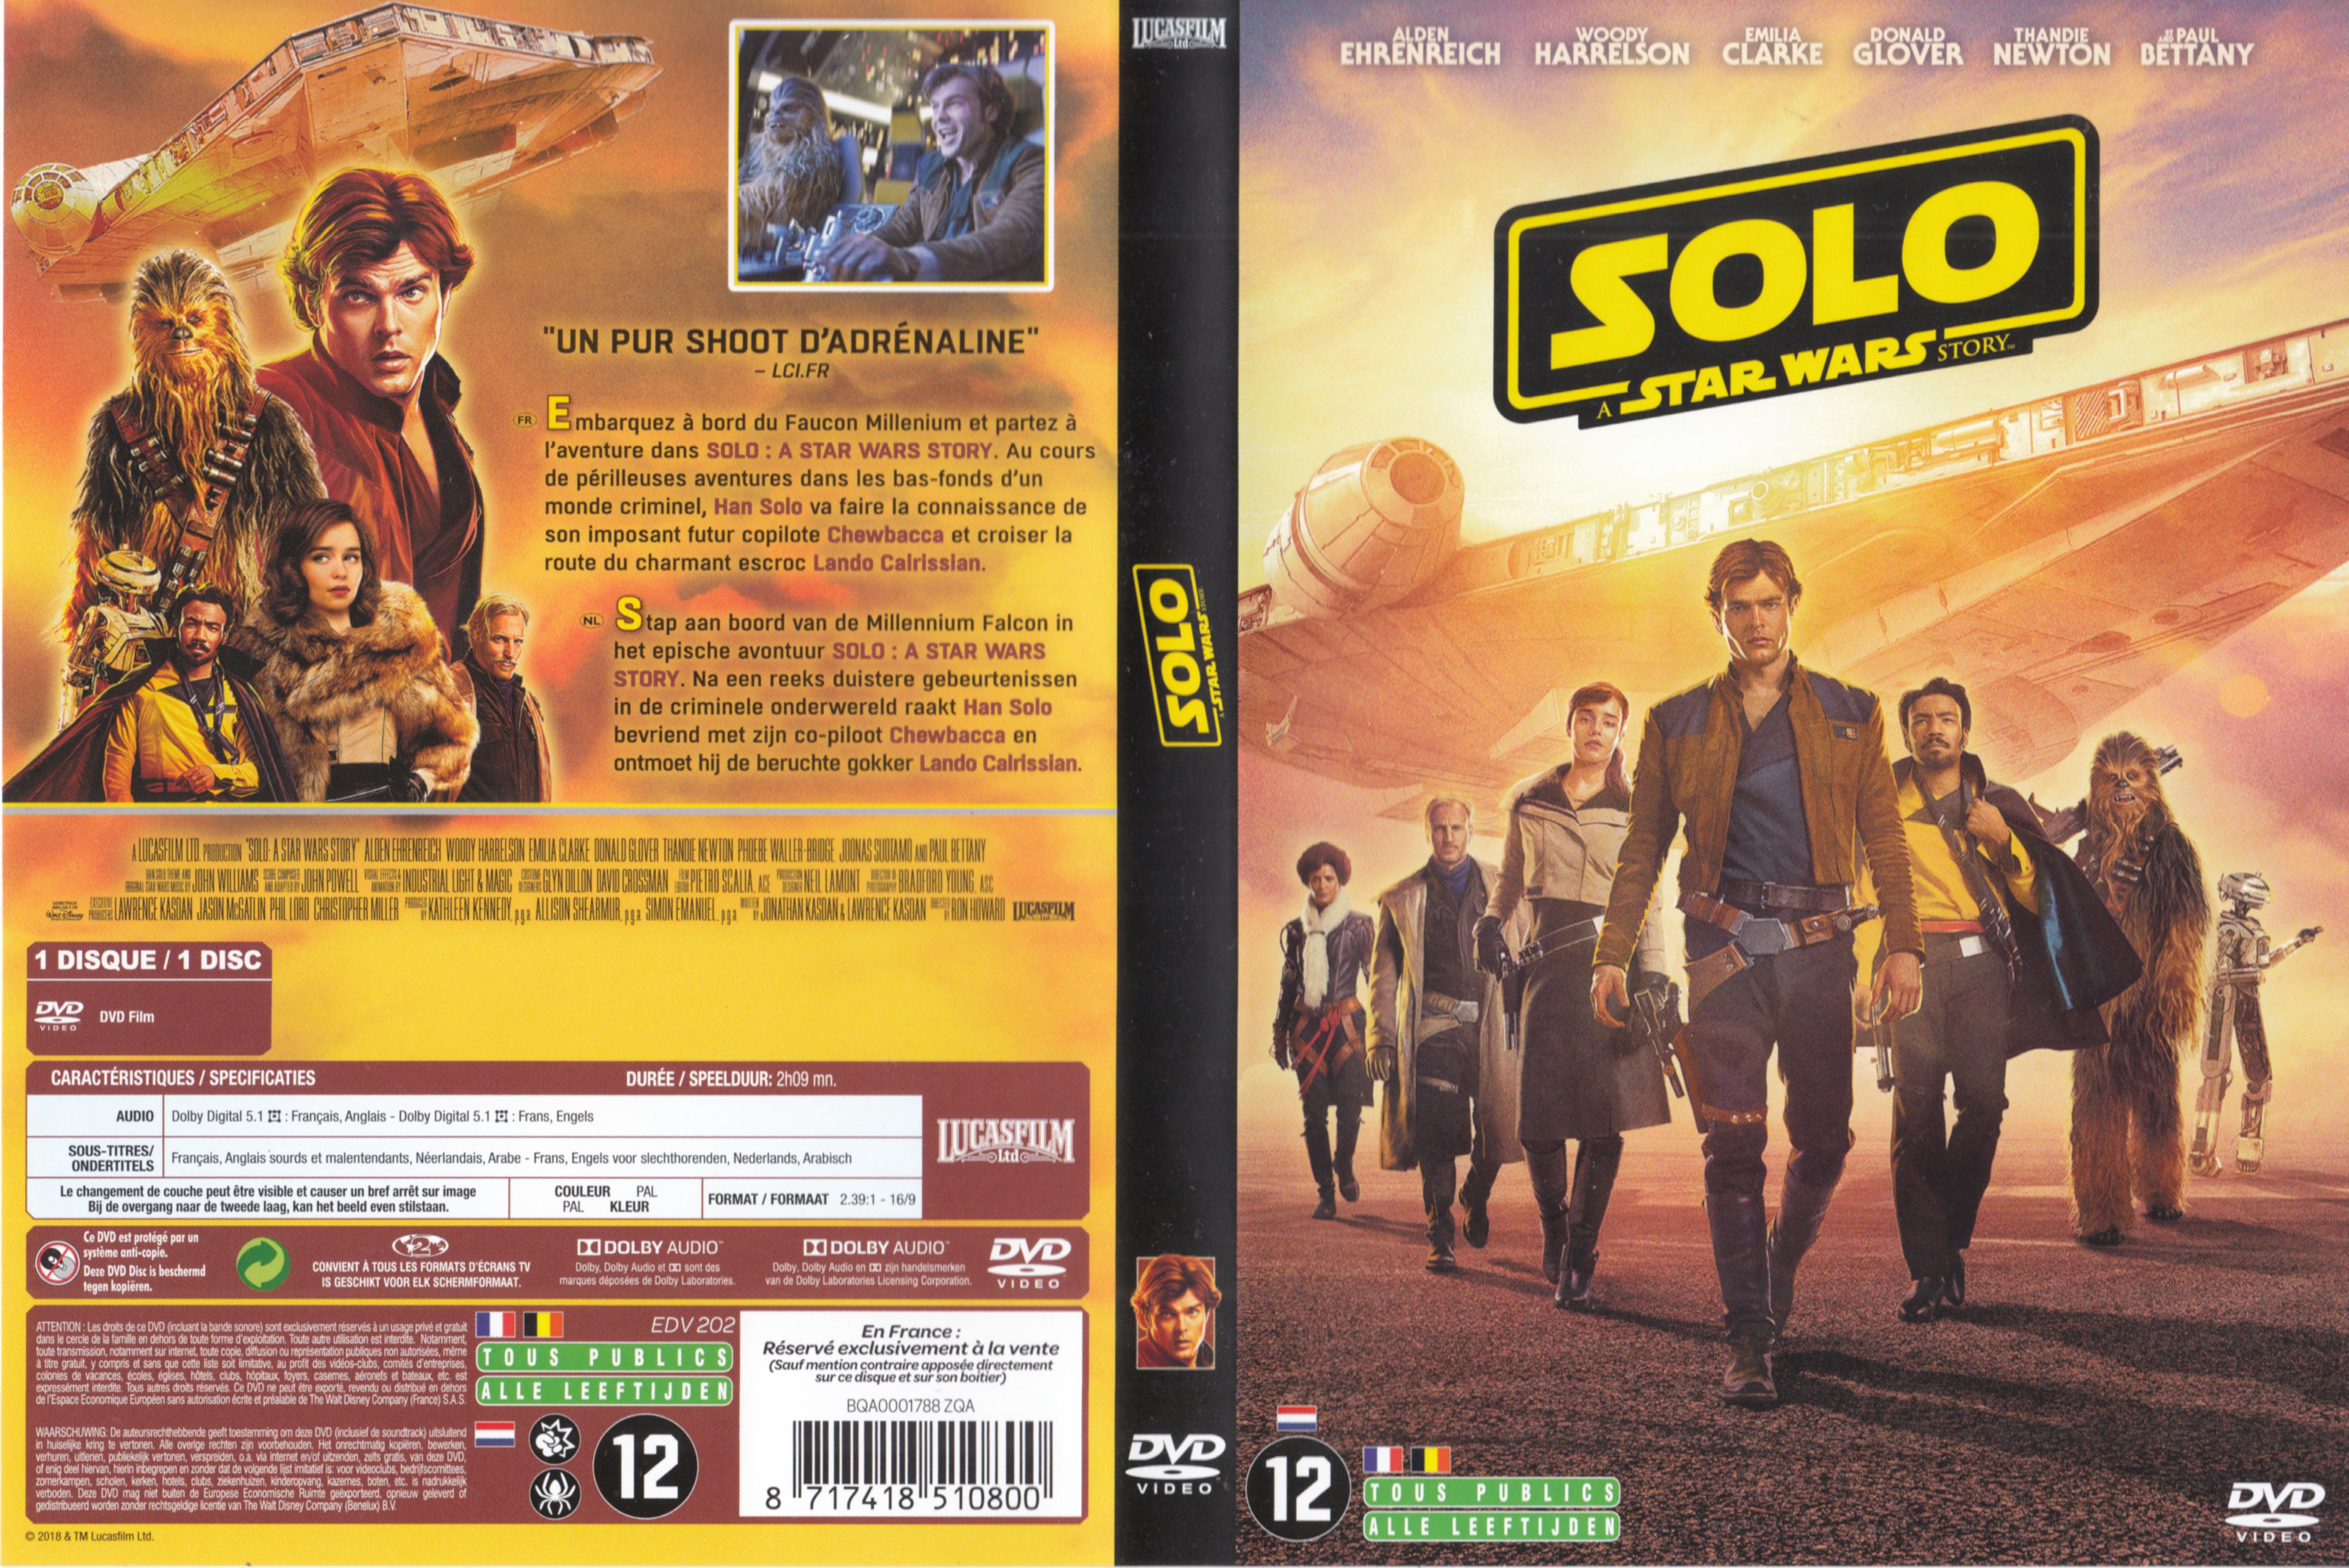 Jaquette DVD Solo: A Star Wars Story